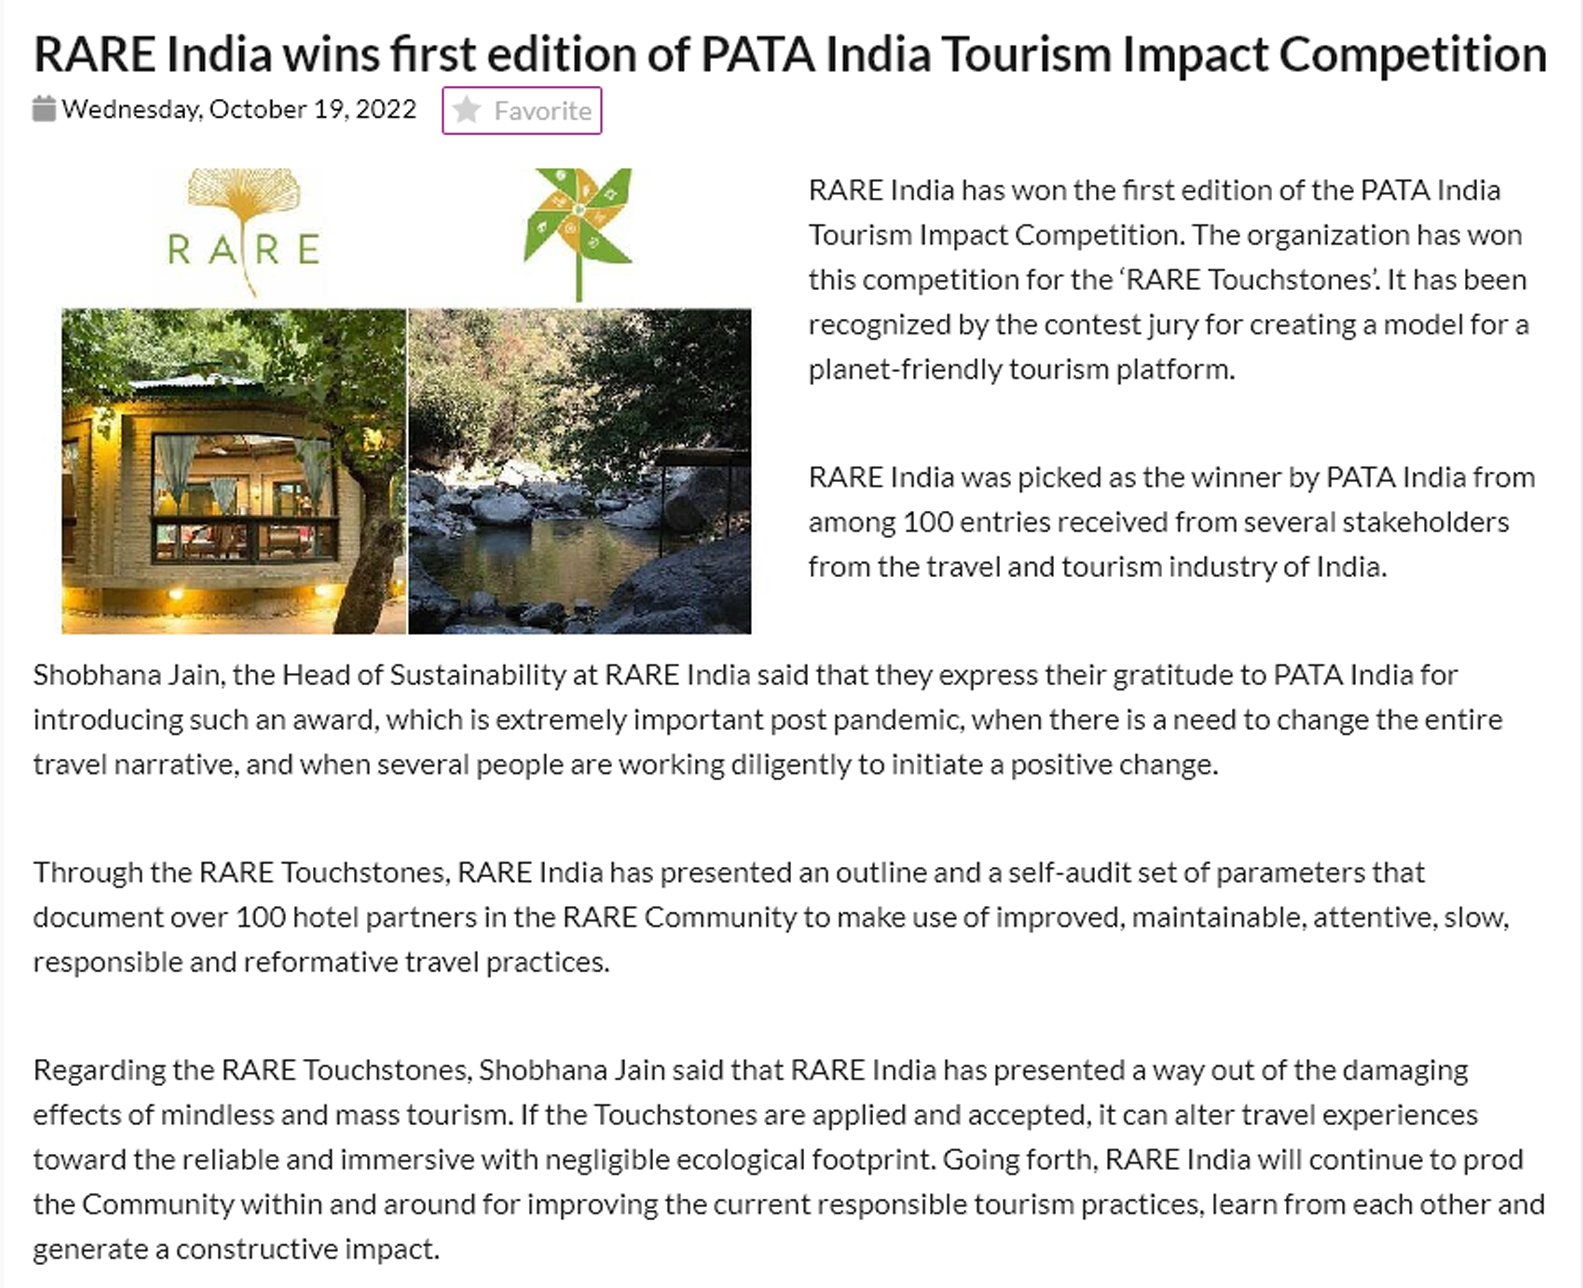 RARE India wins first edition of PATA India Tourism Impact Competition